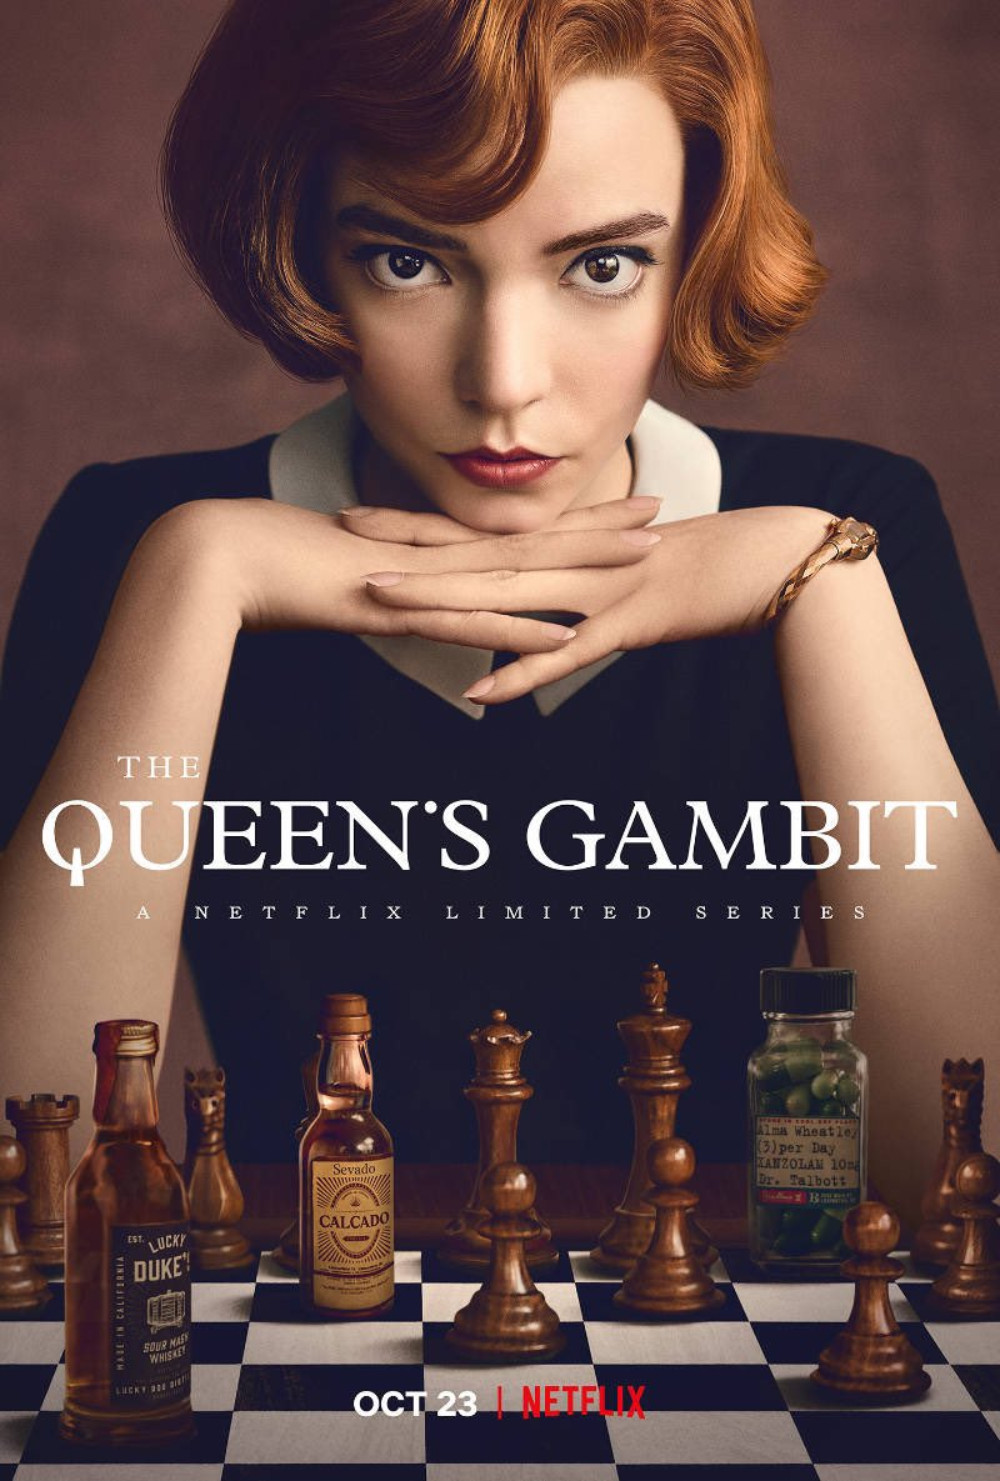 Is There Going To Be The Queen's Gambit Season 2? - Capital